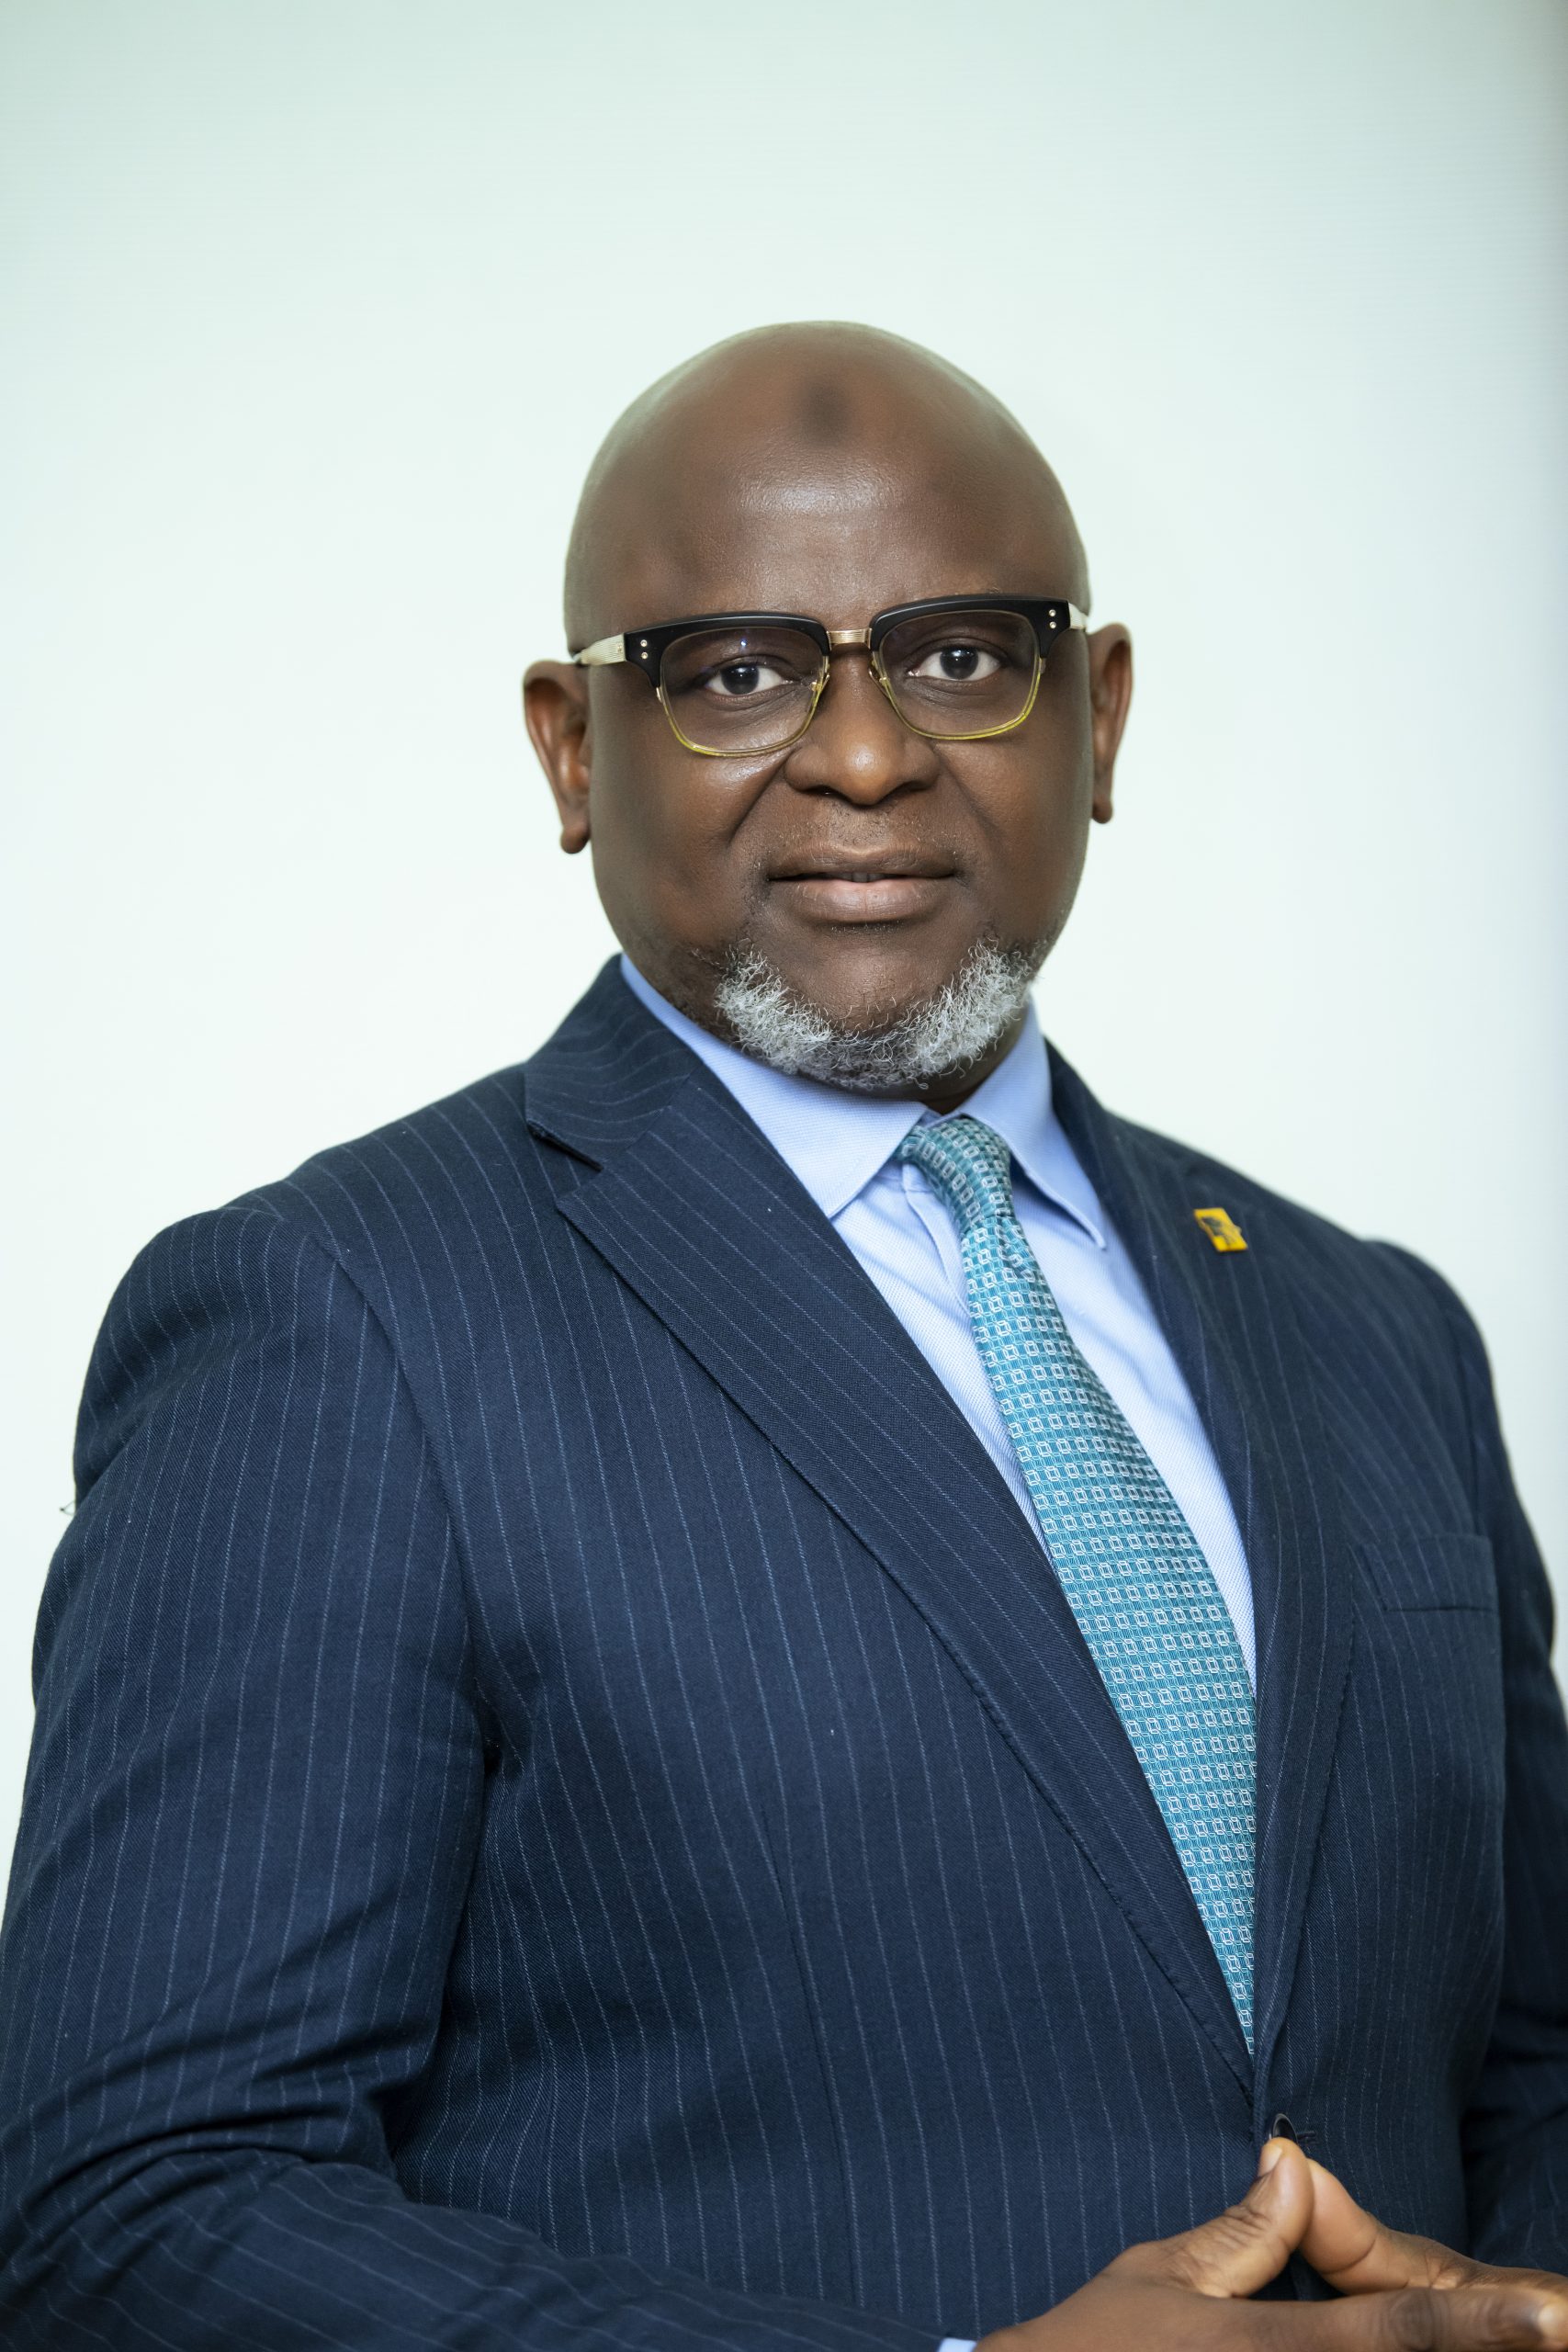 Adeduntan: FirstBank Is Future-Proof And Remains Committed To The Gold Standard Of Excellence In Banking